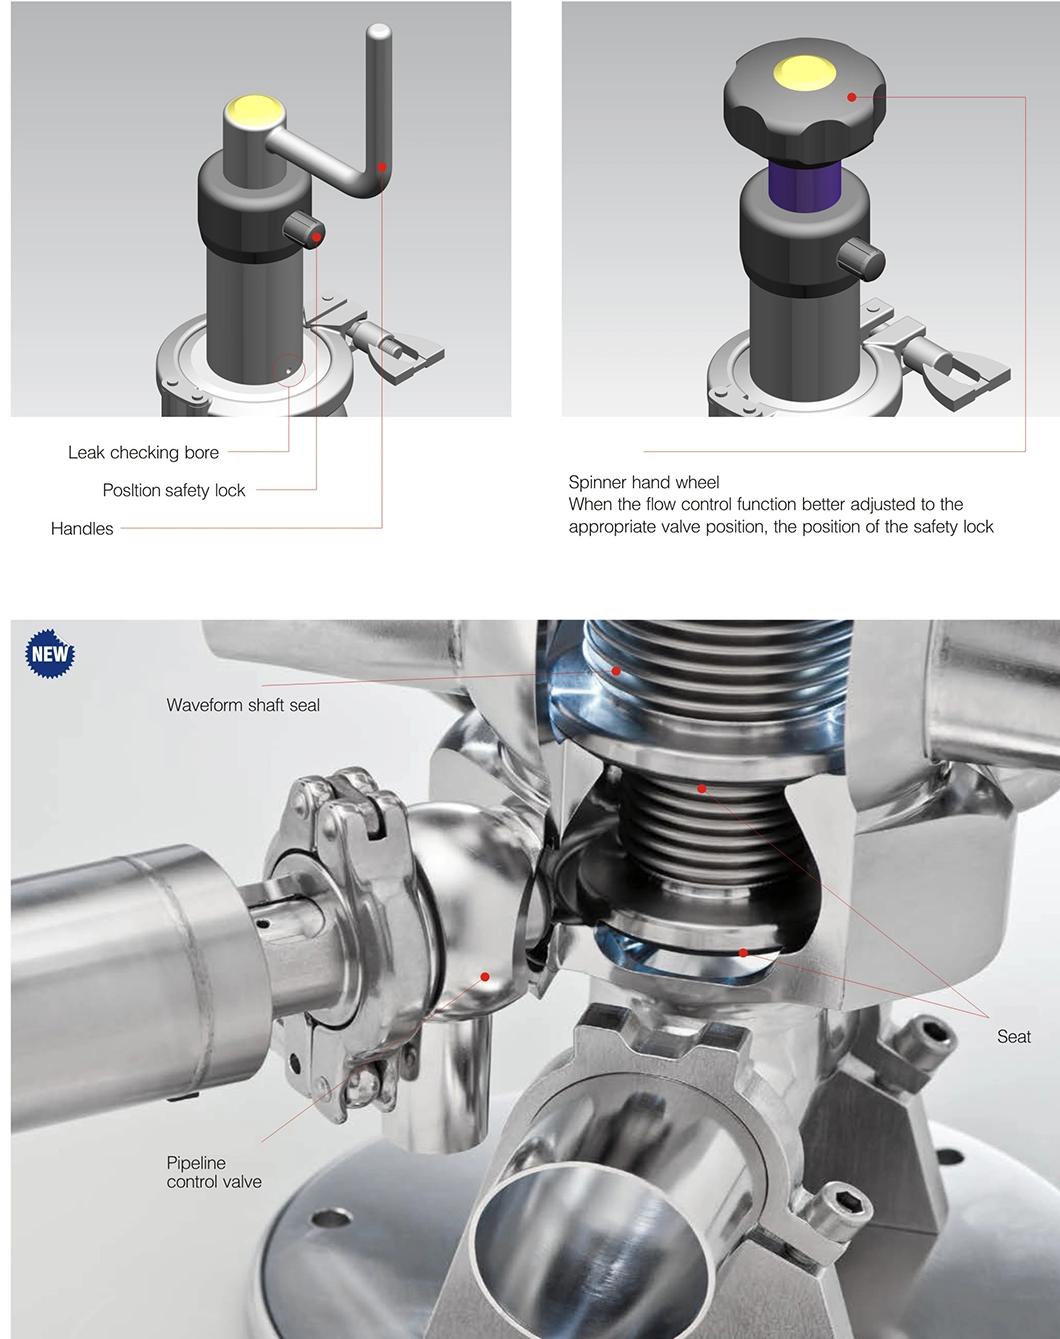 Sanitary Pneumatic Shut-off and Diverter Valve for Food Beverage Dairy